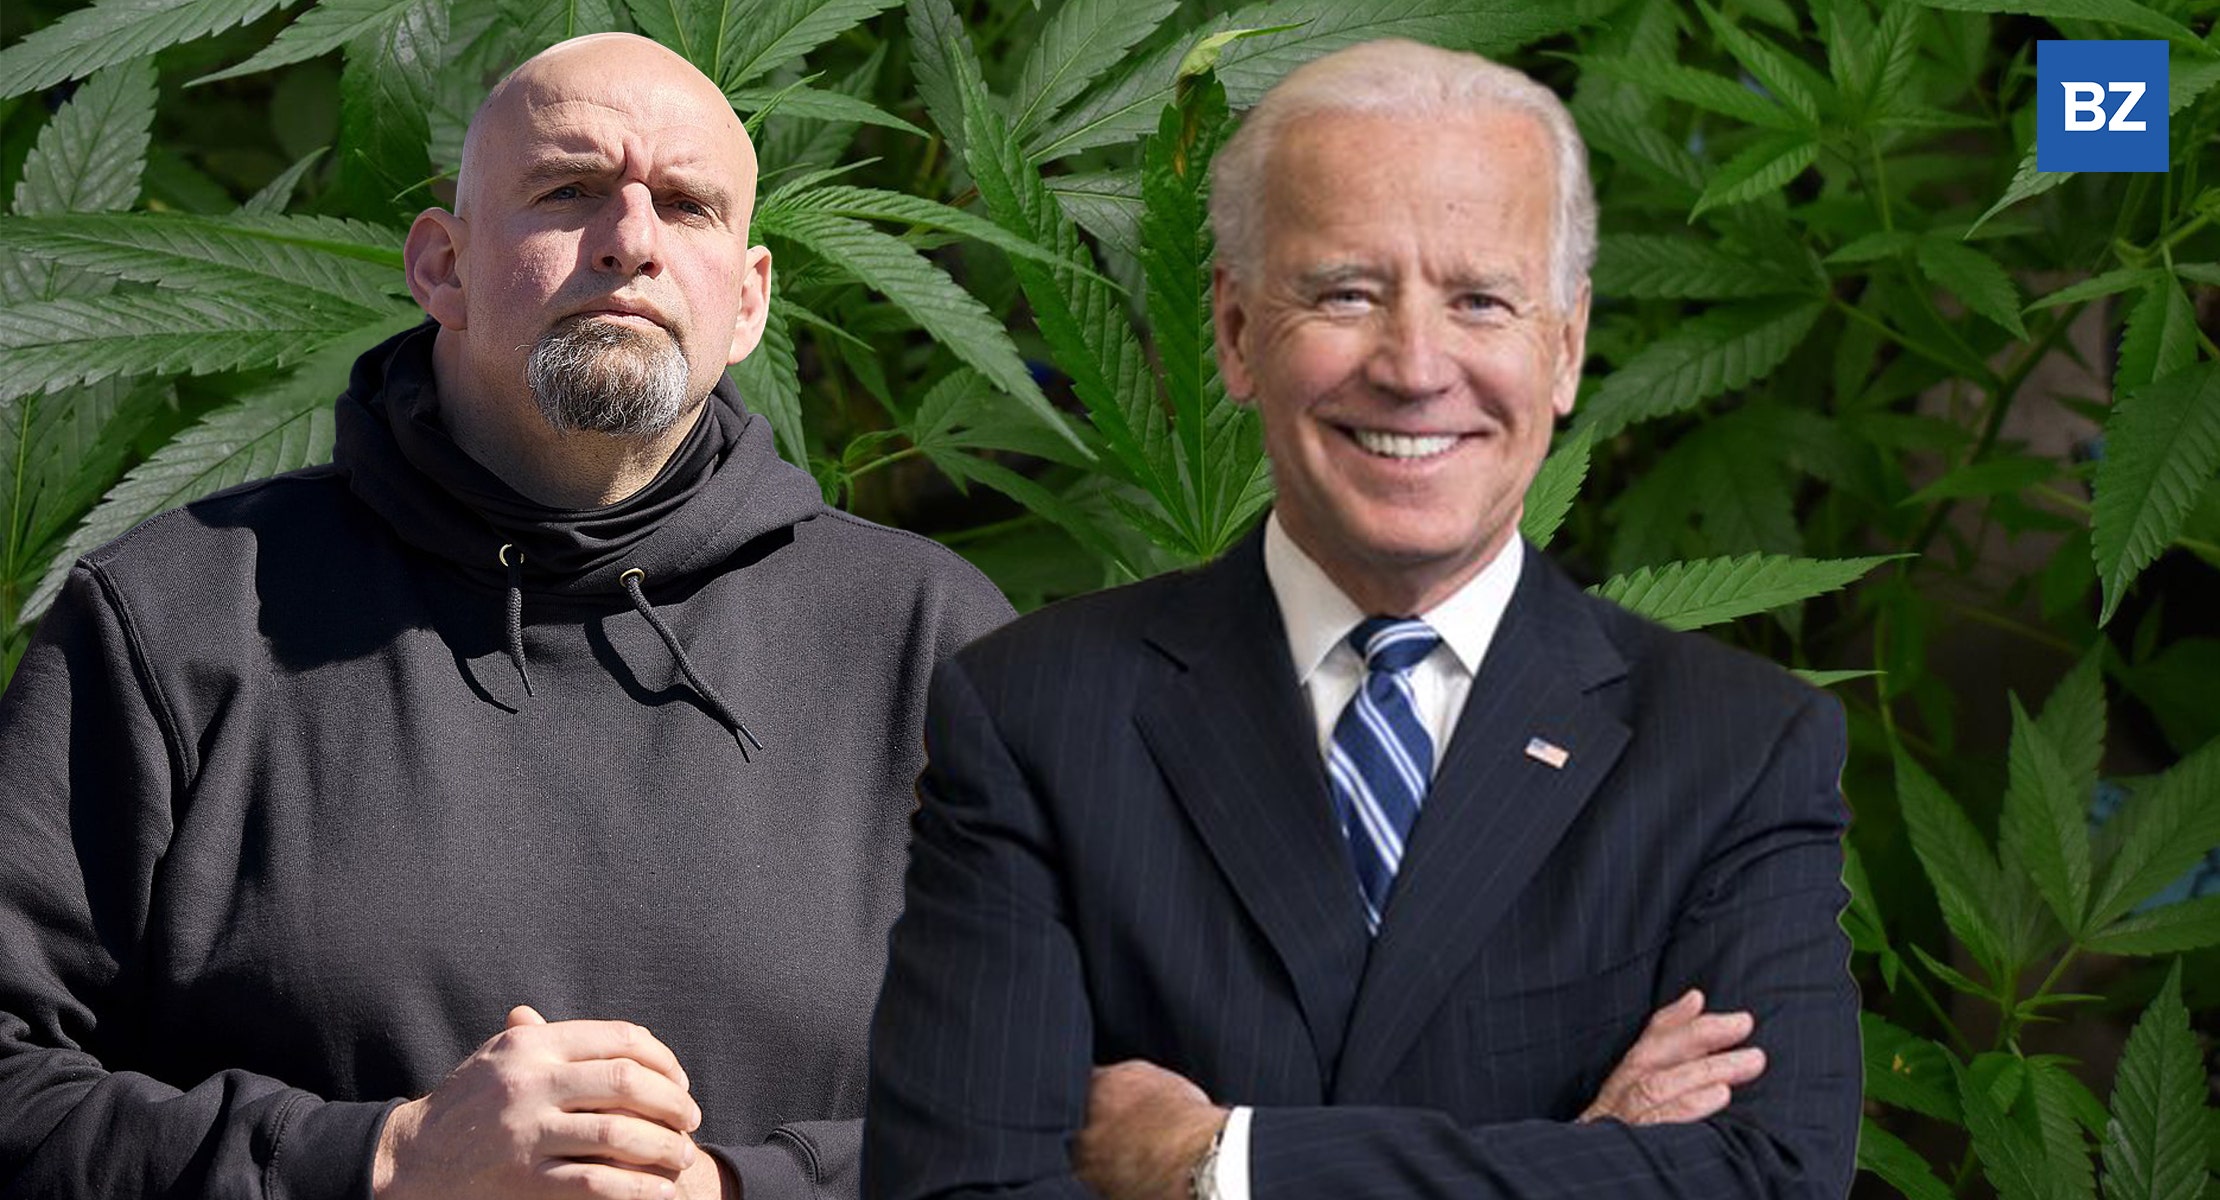 Biden Weighs In On Cannabis During Meeting With PA Senate Candidate Fetterman